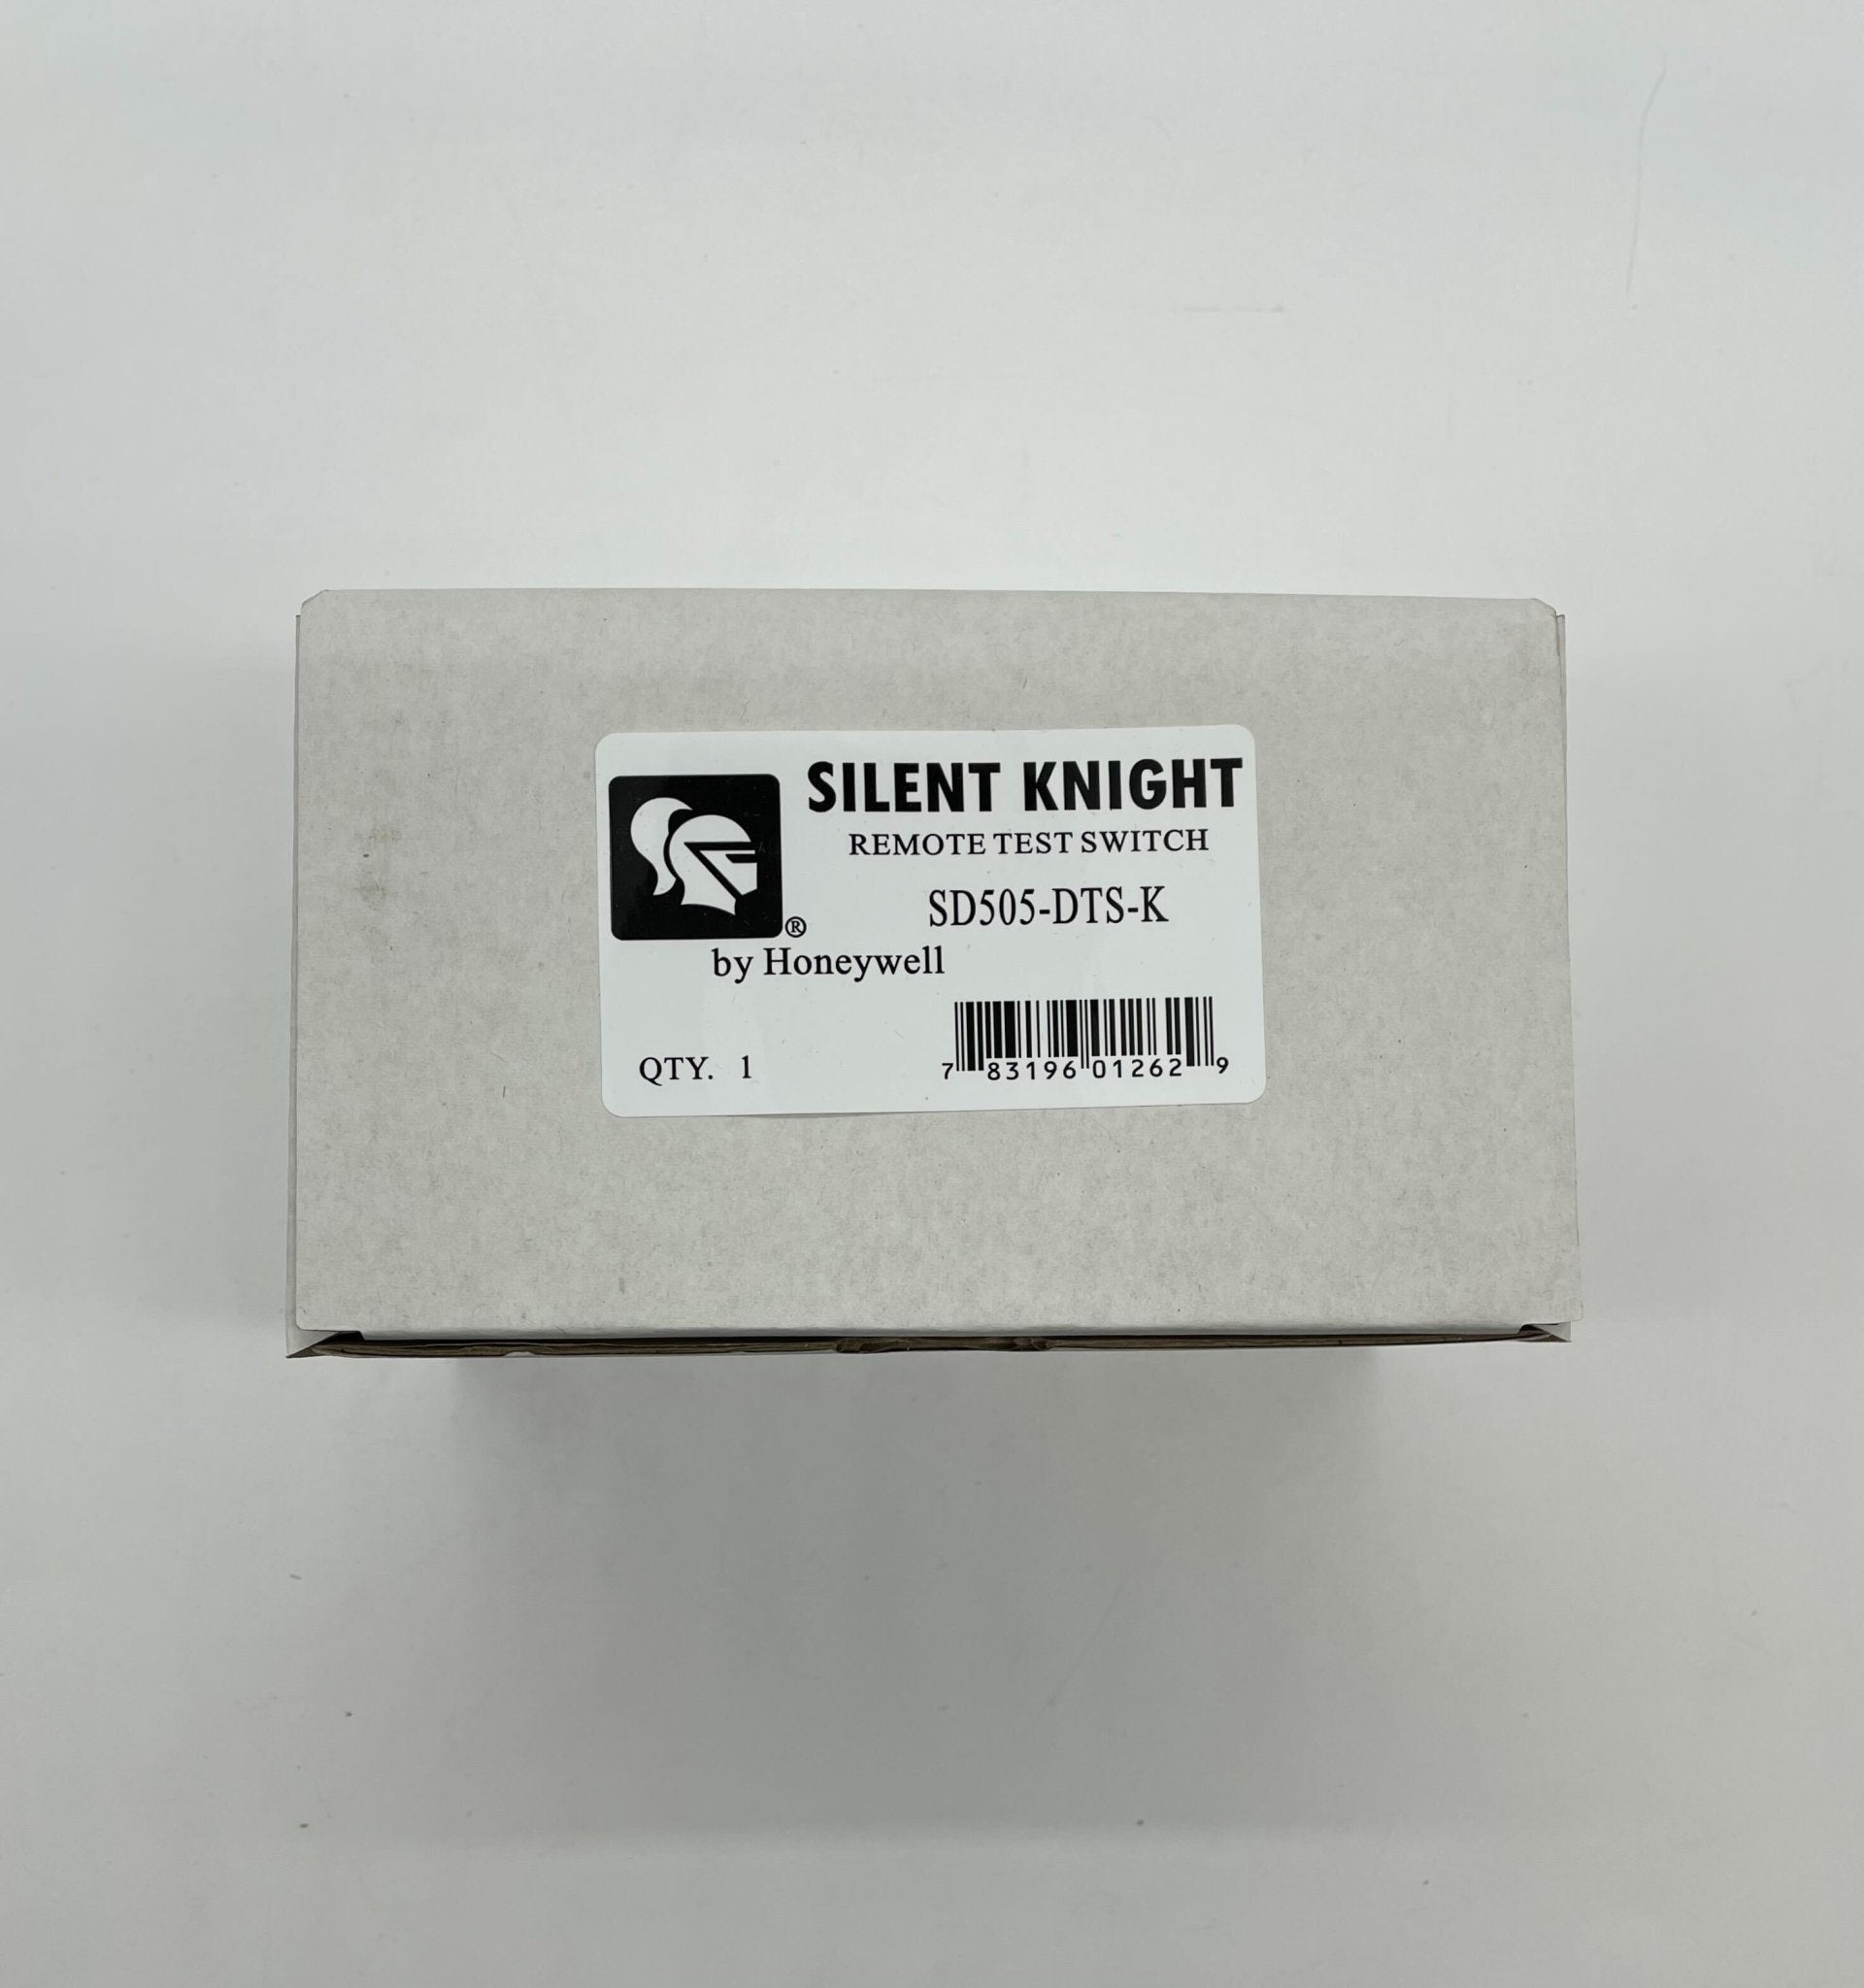 Silent Knight SD505-DTS-K Remote Test Switch - The Fire Alarm Supplier